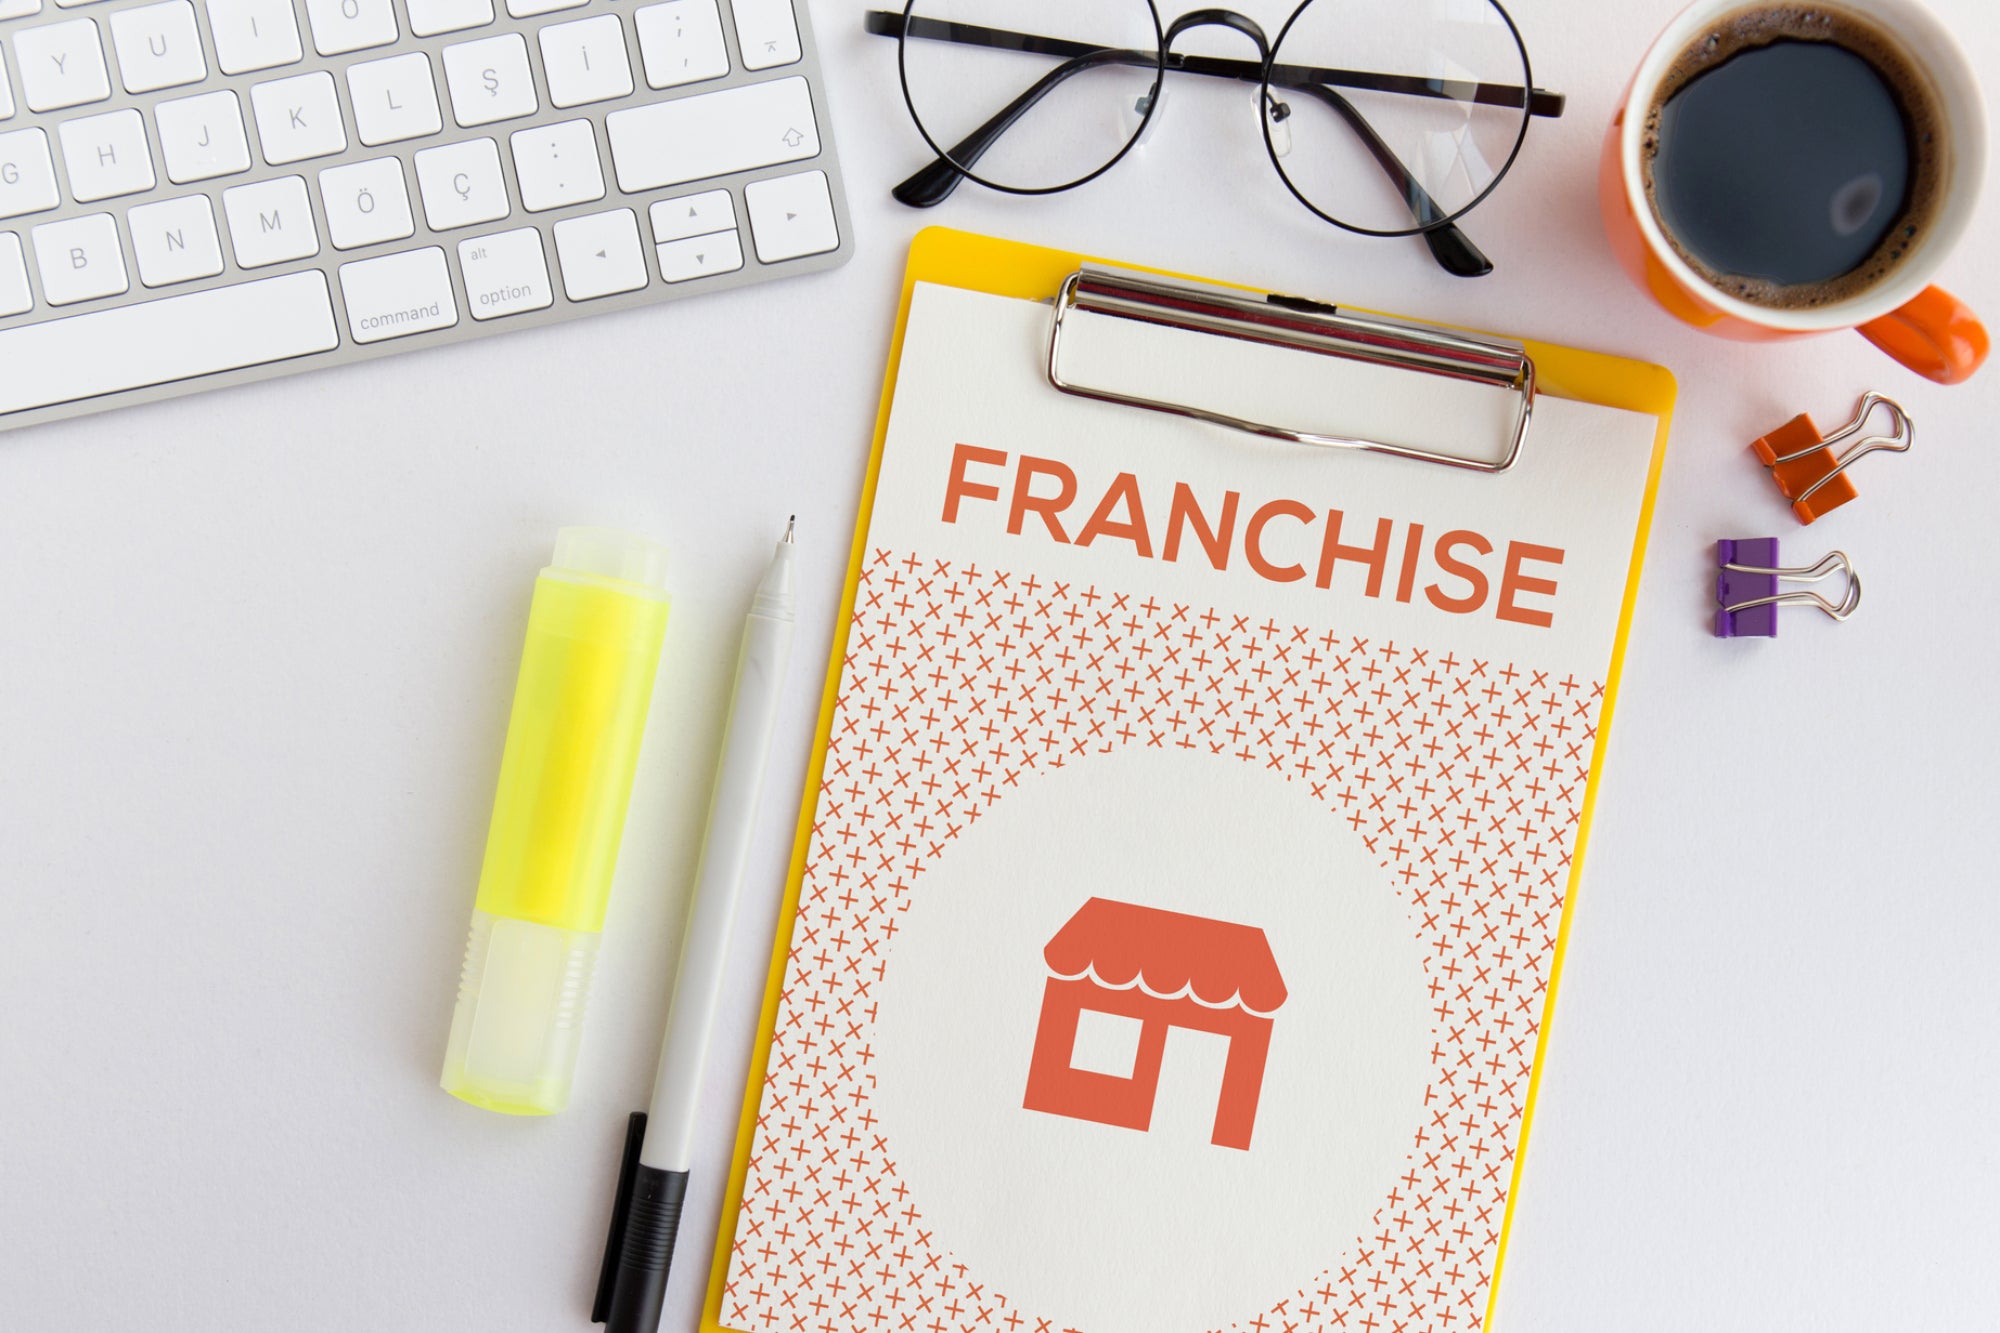 Become a Franchise Owner in 5 Easy Steps